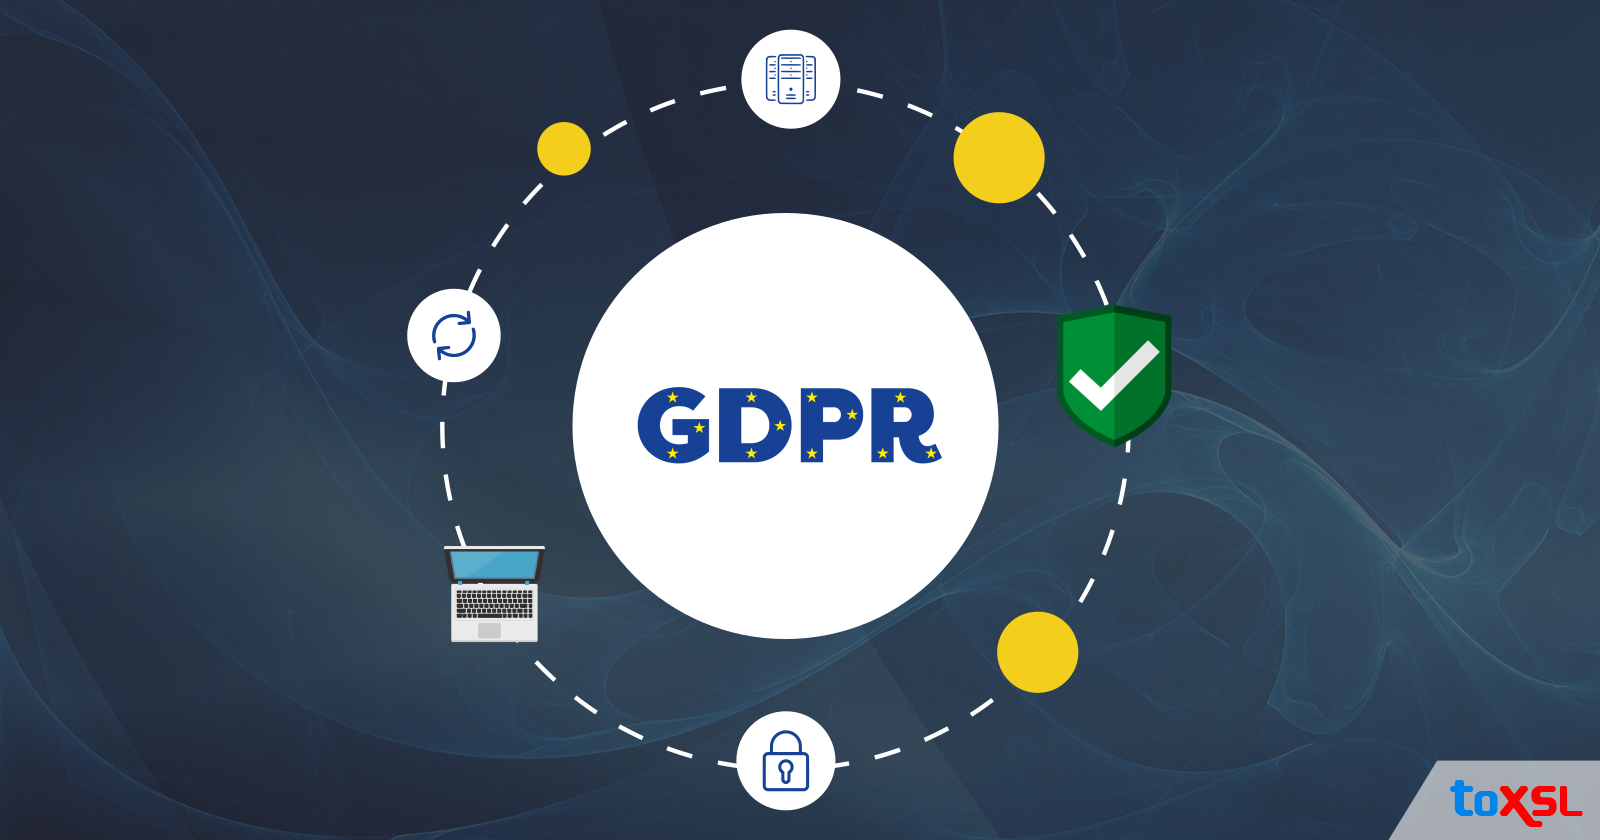 Addressing the Challenges to Make Your Test Data GDPR Compliant